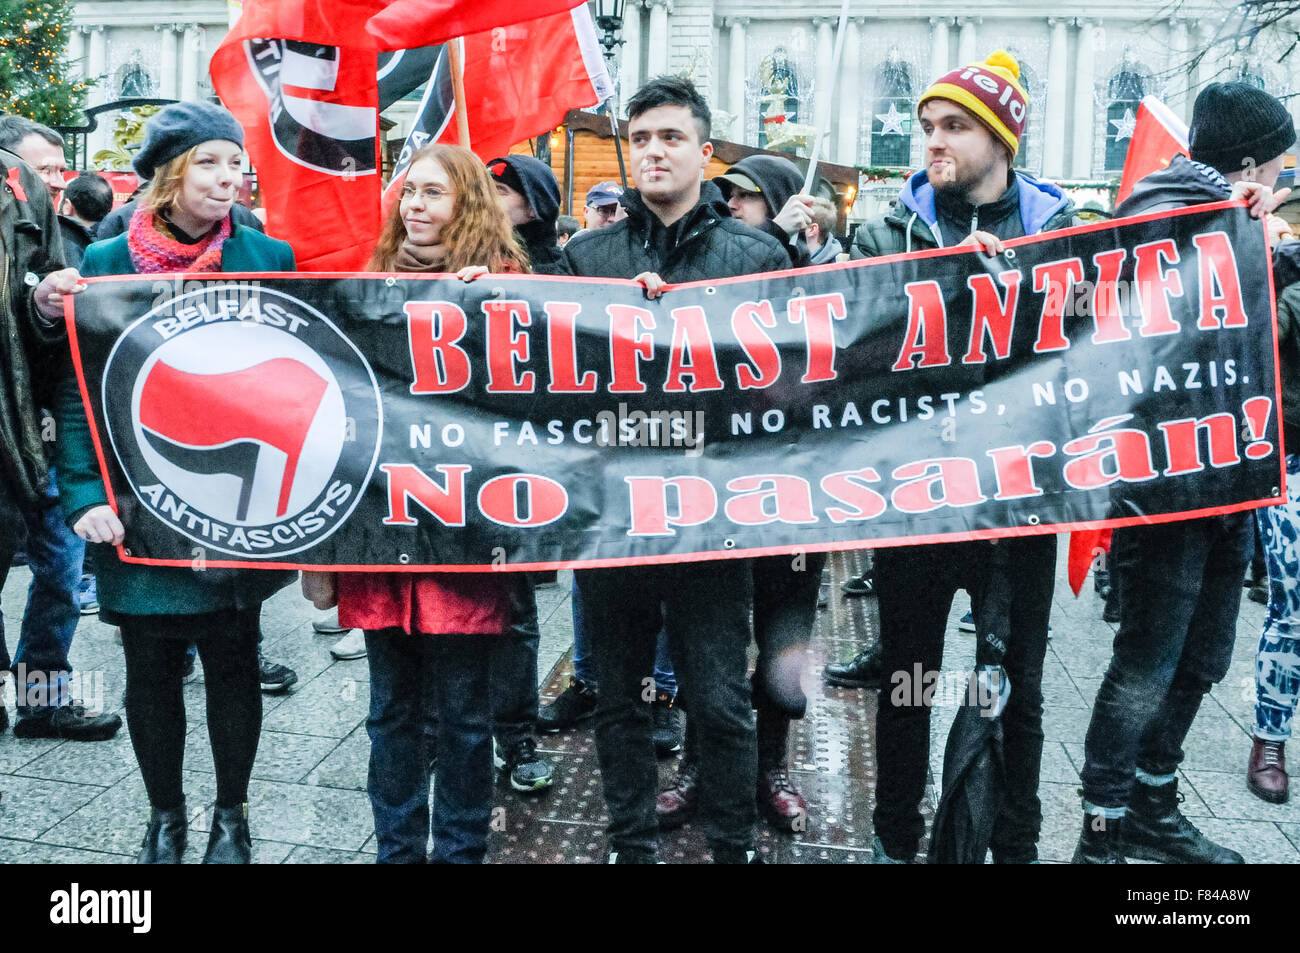 Belfast, Northern Ireland. 05 Dec 2015 - Pro-refugee supporters from 'Belfast Antifa' gather to protest against the Protestant Coalition's anti-refugee rally, with the message 'No Fascists. No Racists. No Nazis'.  While they were protesting a small group of neo-nazis appreared and gave a Nazi salute.  Credit:  Stephen Barnes/Alamy Live News Stock Photo